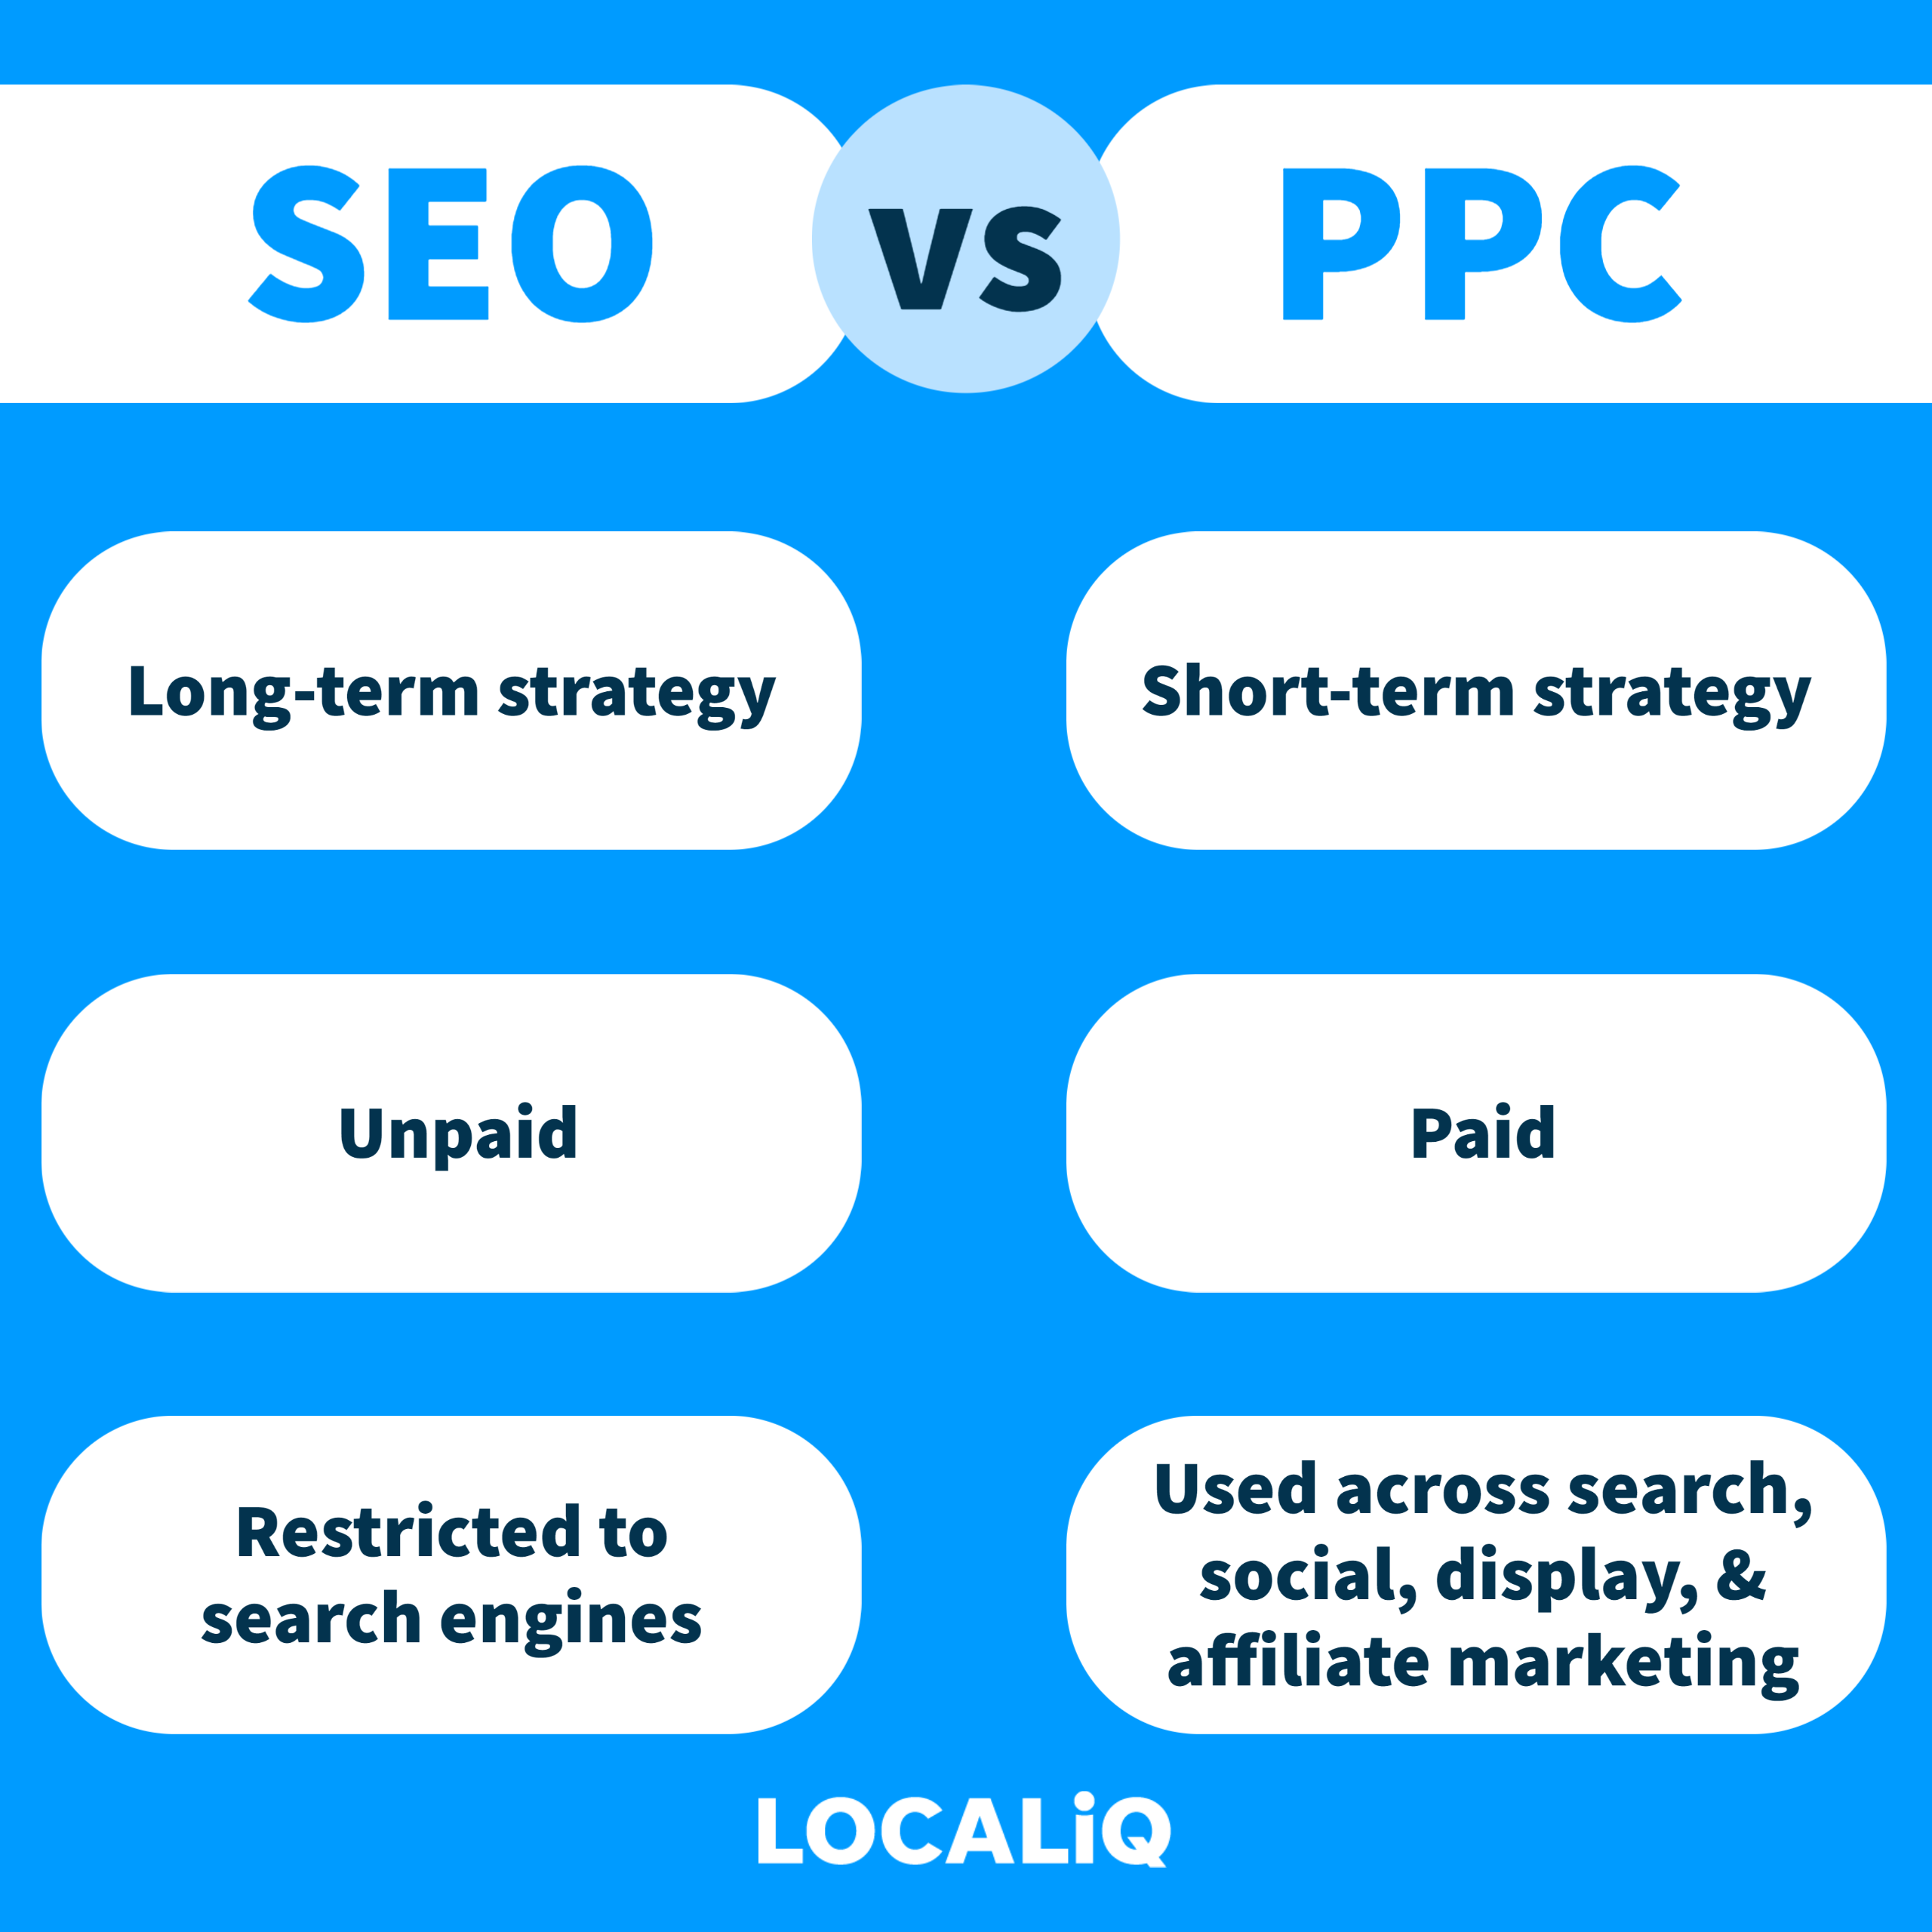 LOCALiQ graphic showing the differences between SEO and PPC